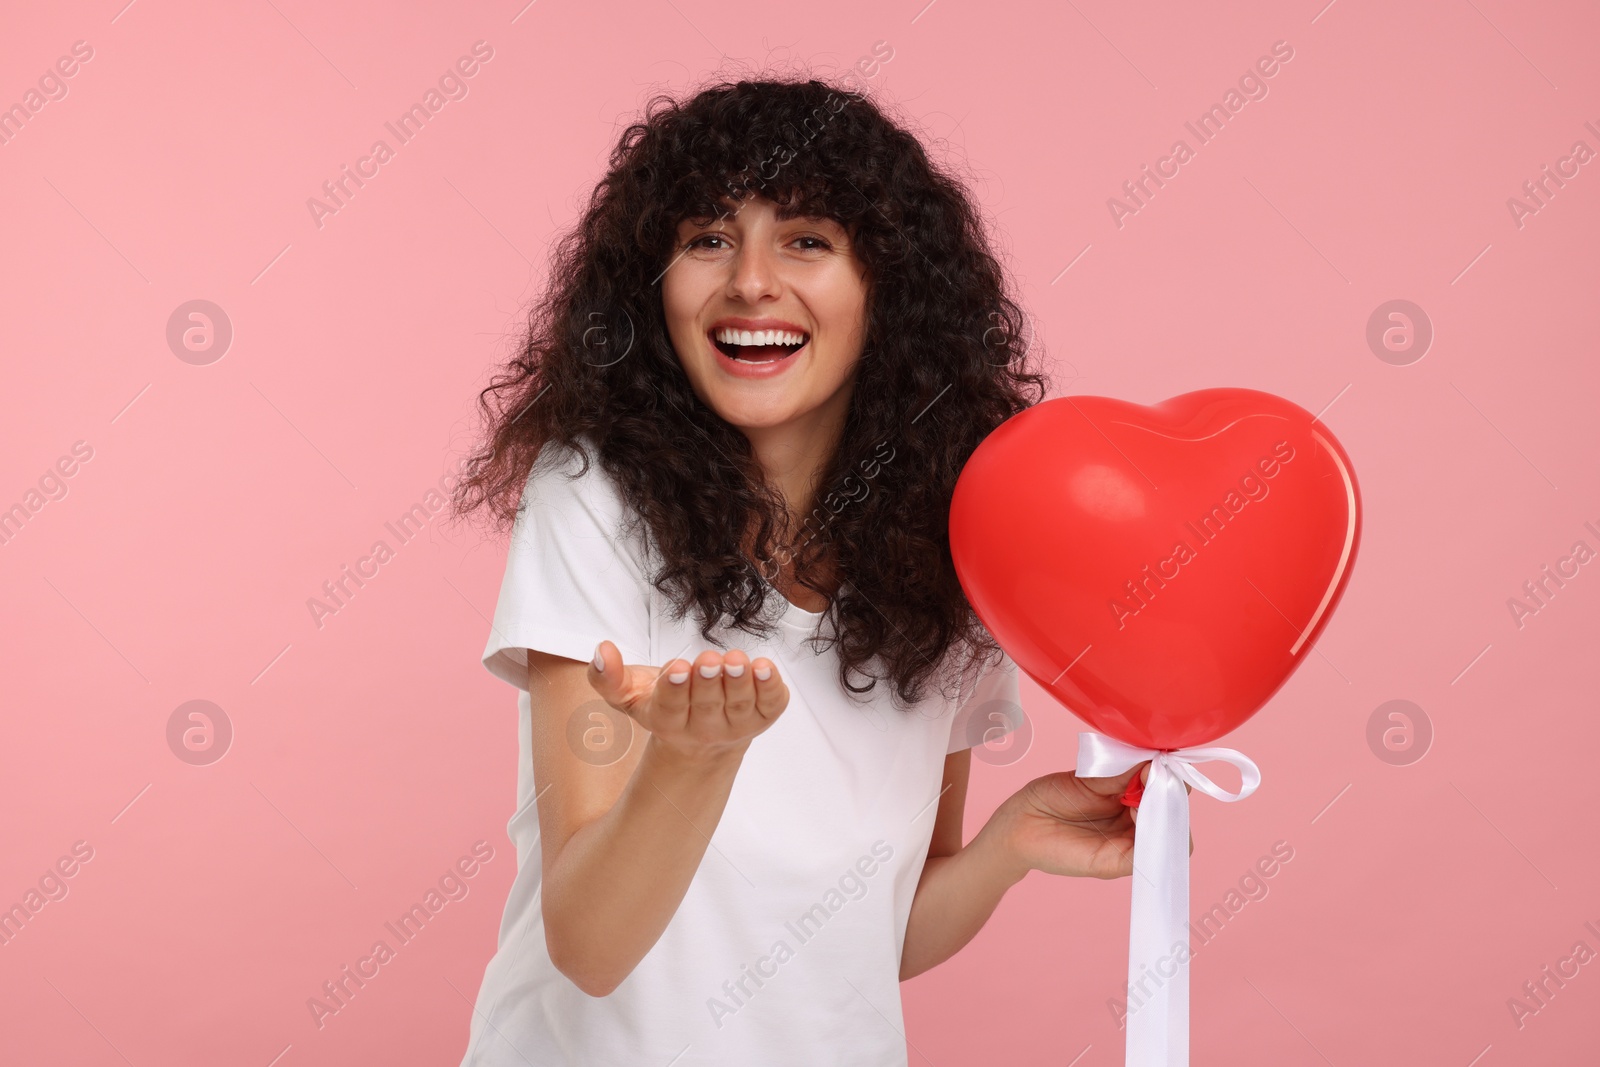 Photo of Young woman holding red heart shaped balloon on yellow background